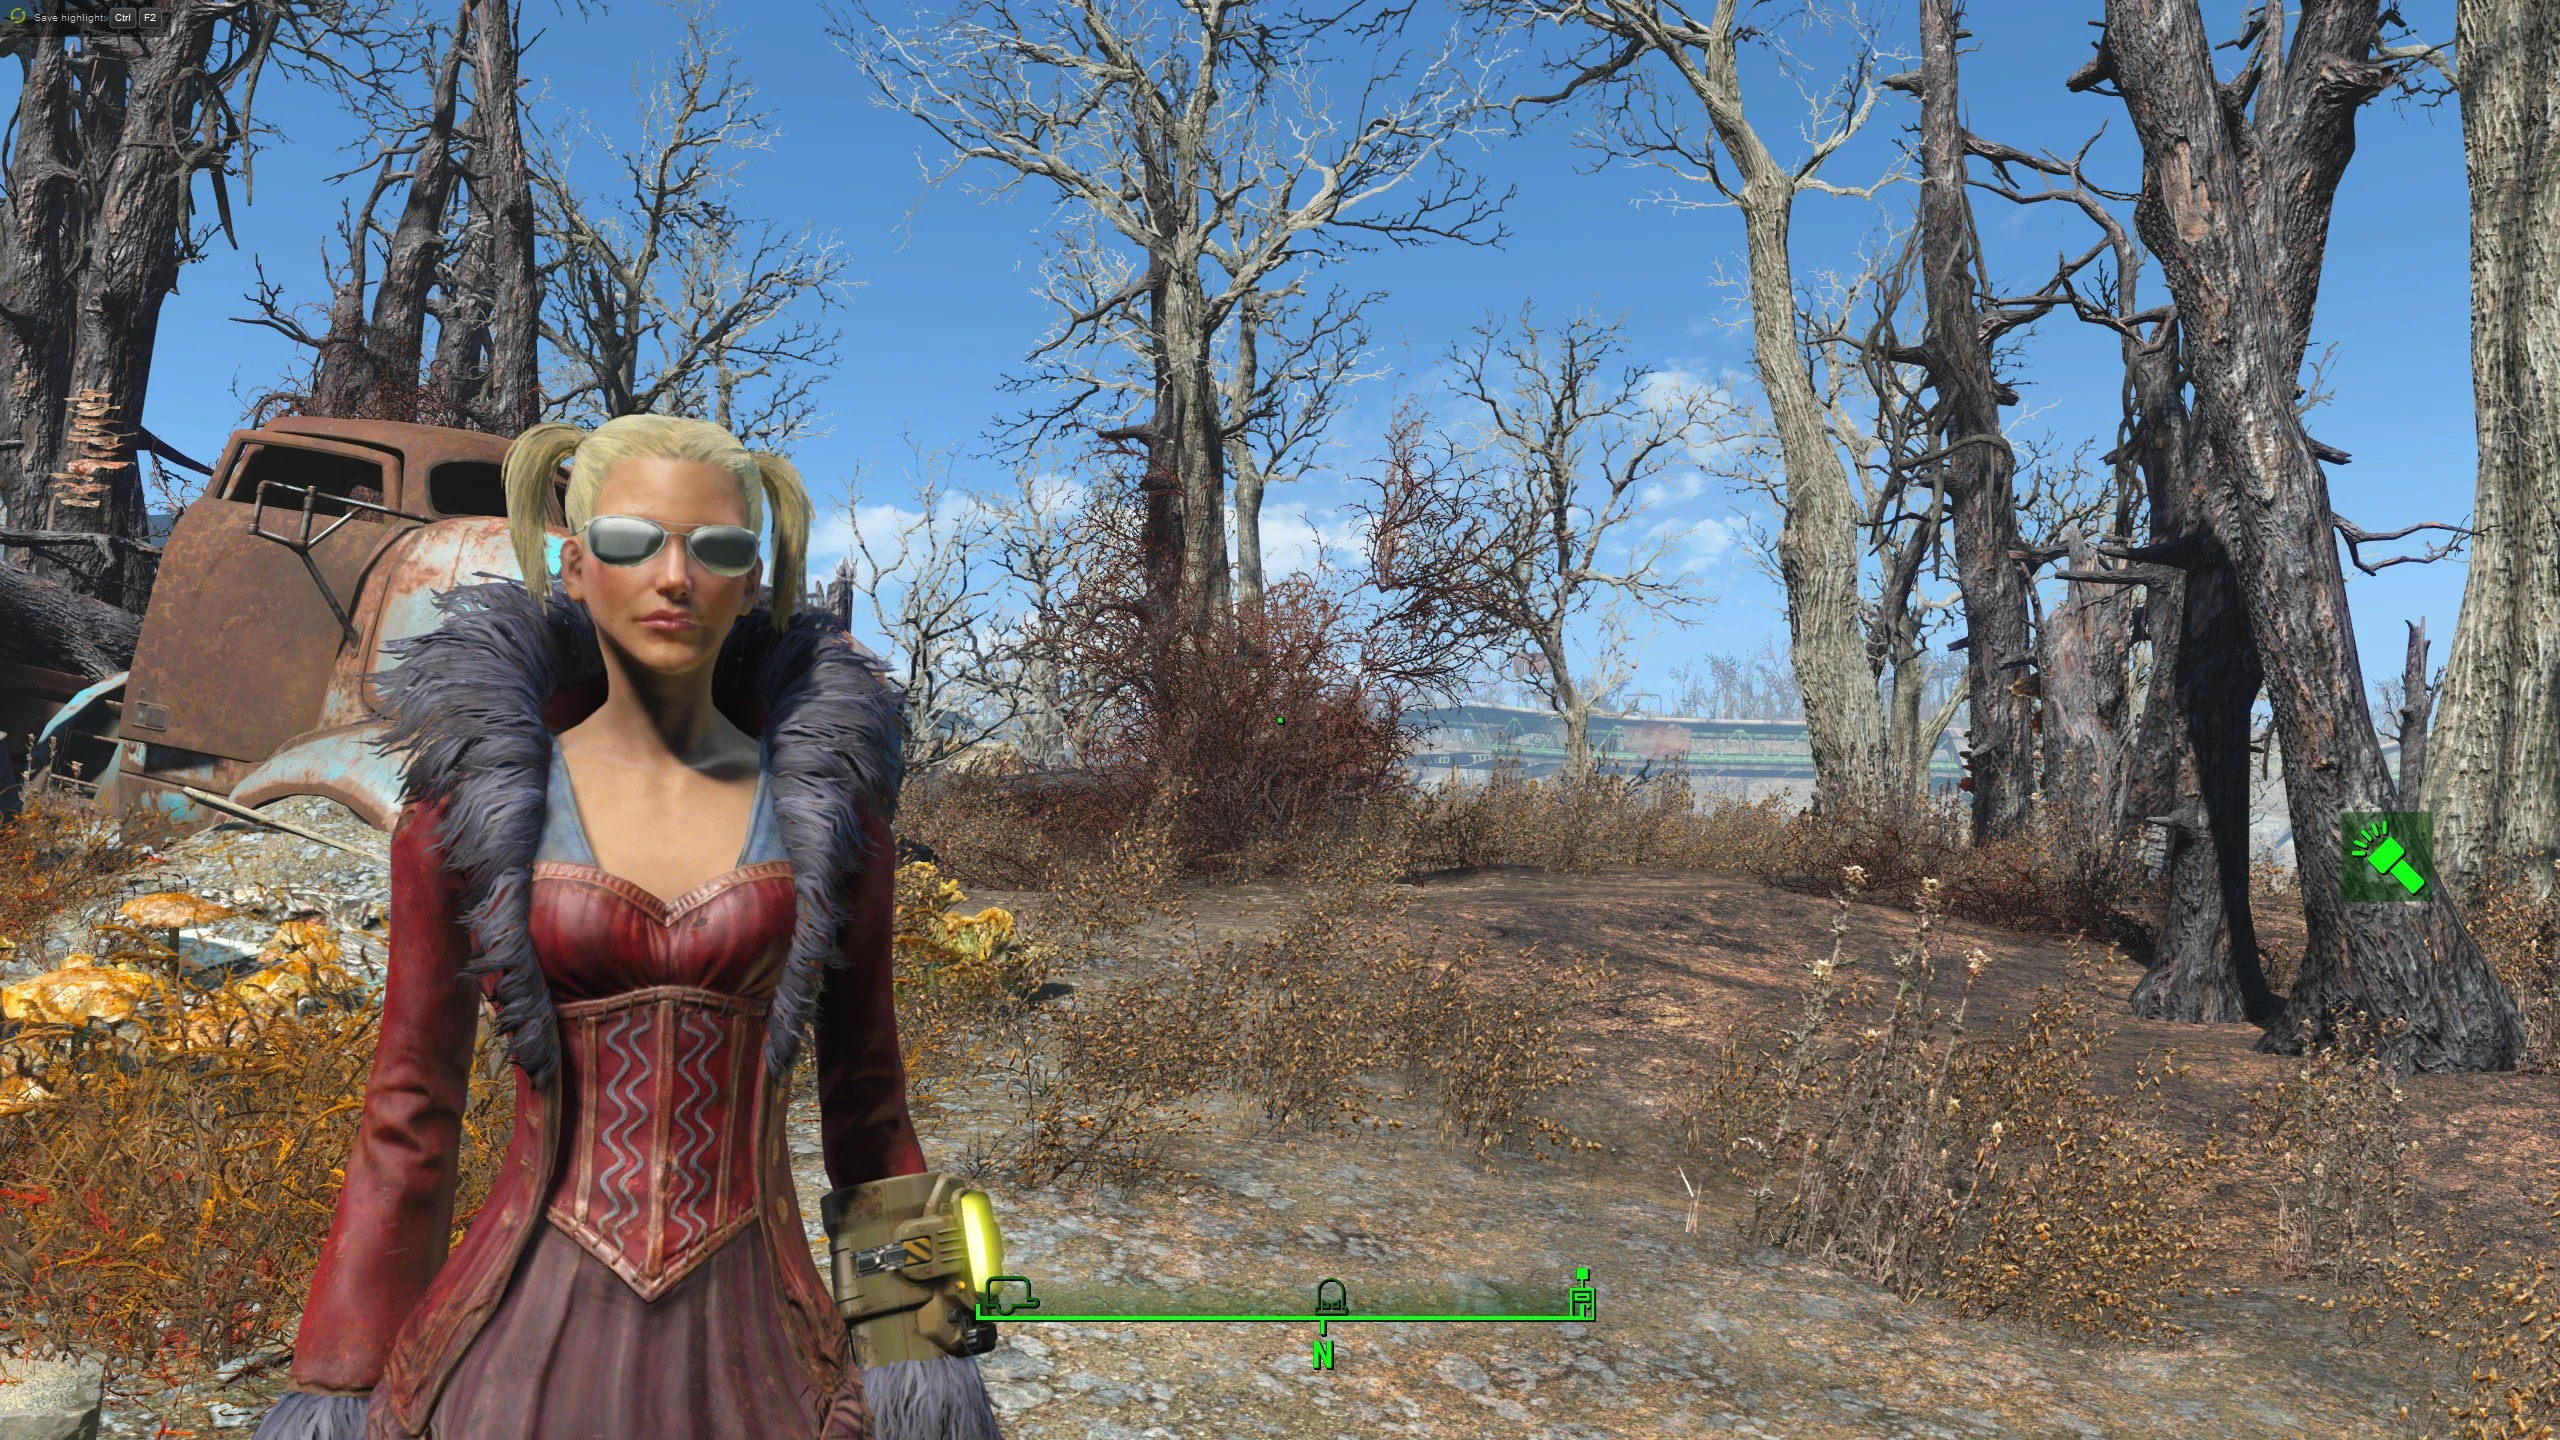 My Ivana Milicevic Character At Fallout 4 Nexus Mods And Community Images, Photos, Reviews